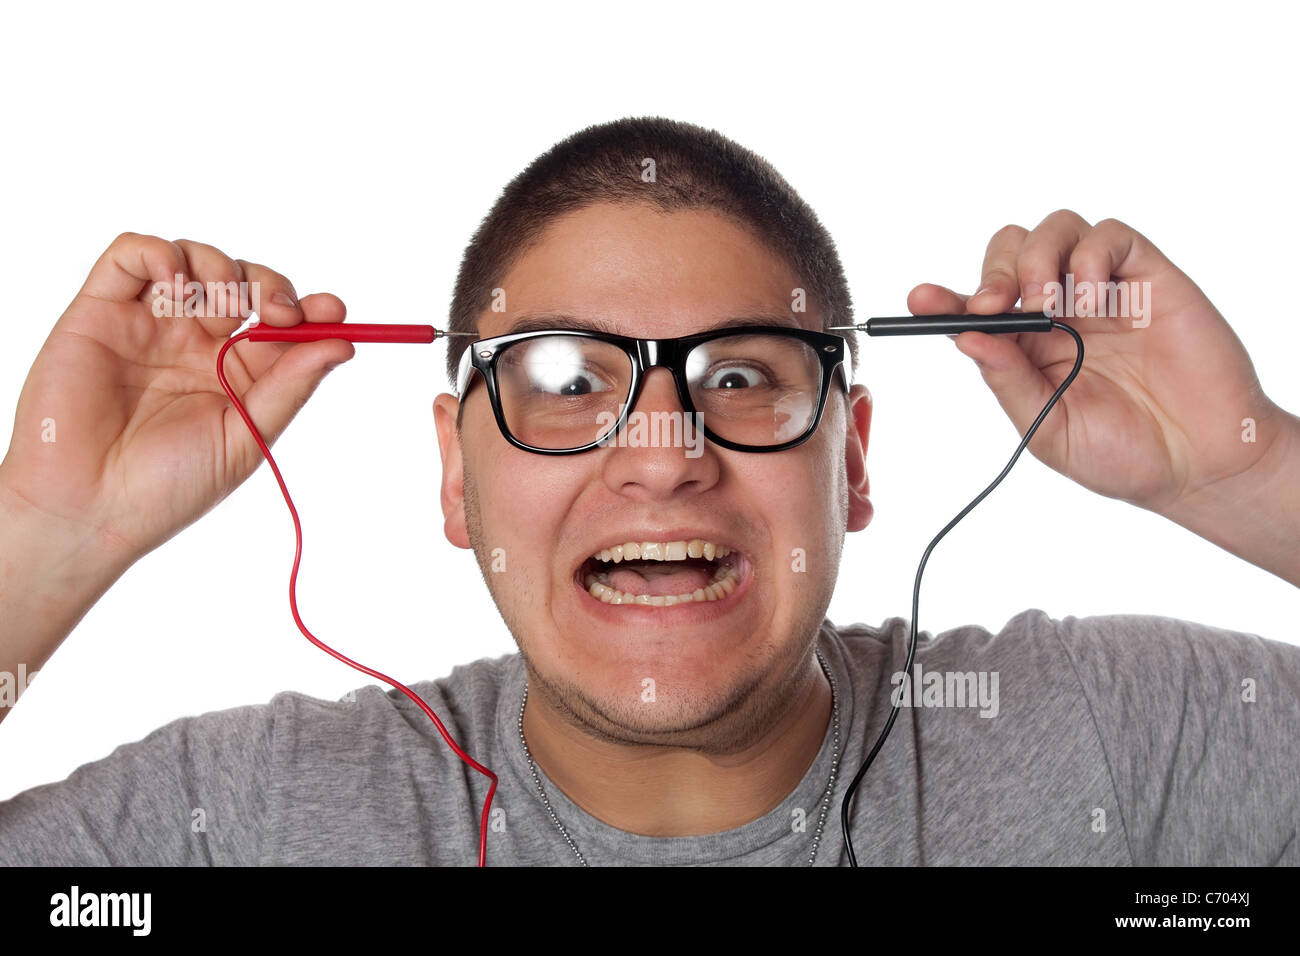 A goofy man wearing nerd glasses isolated over white with a funny expression on his face. Stock Photo